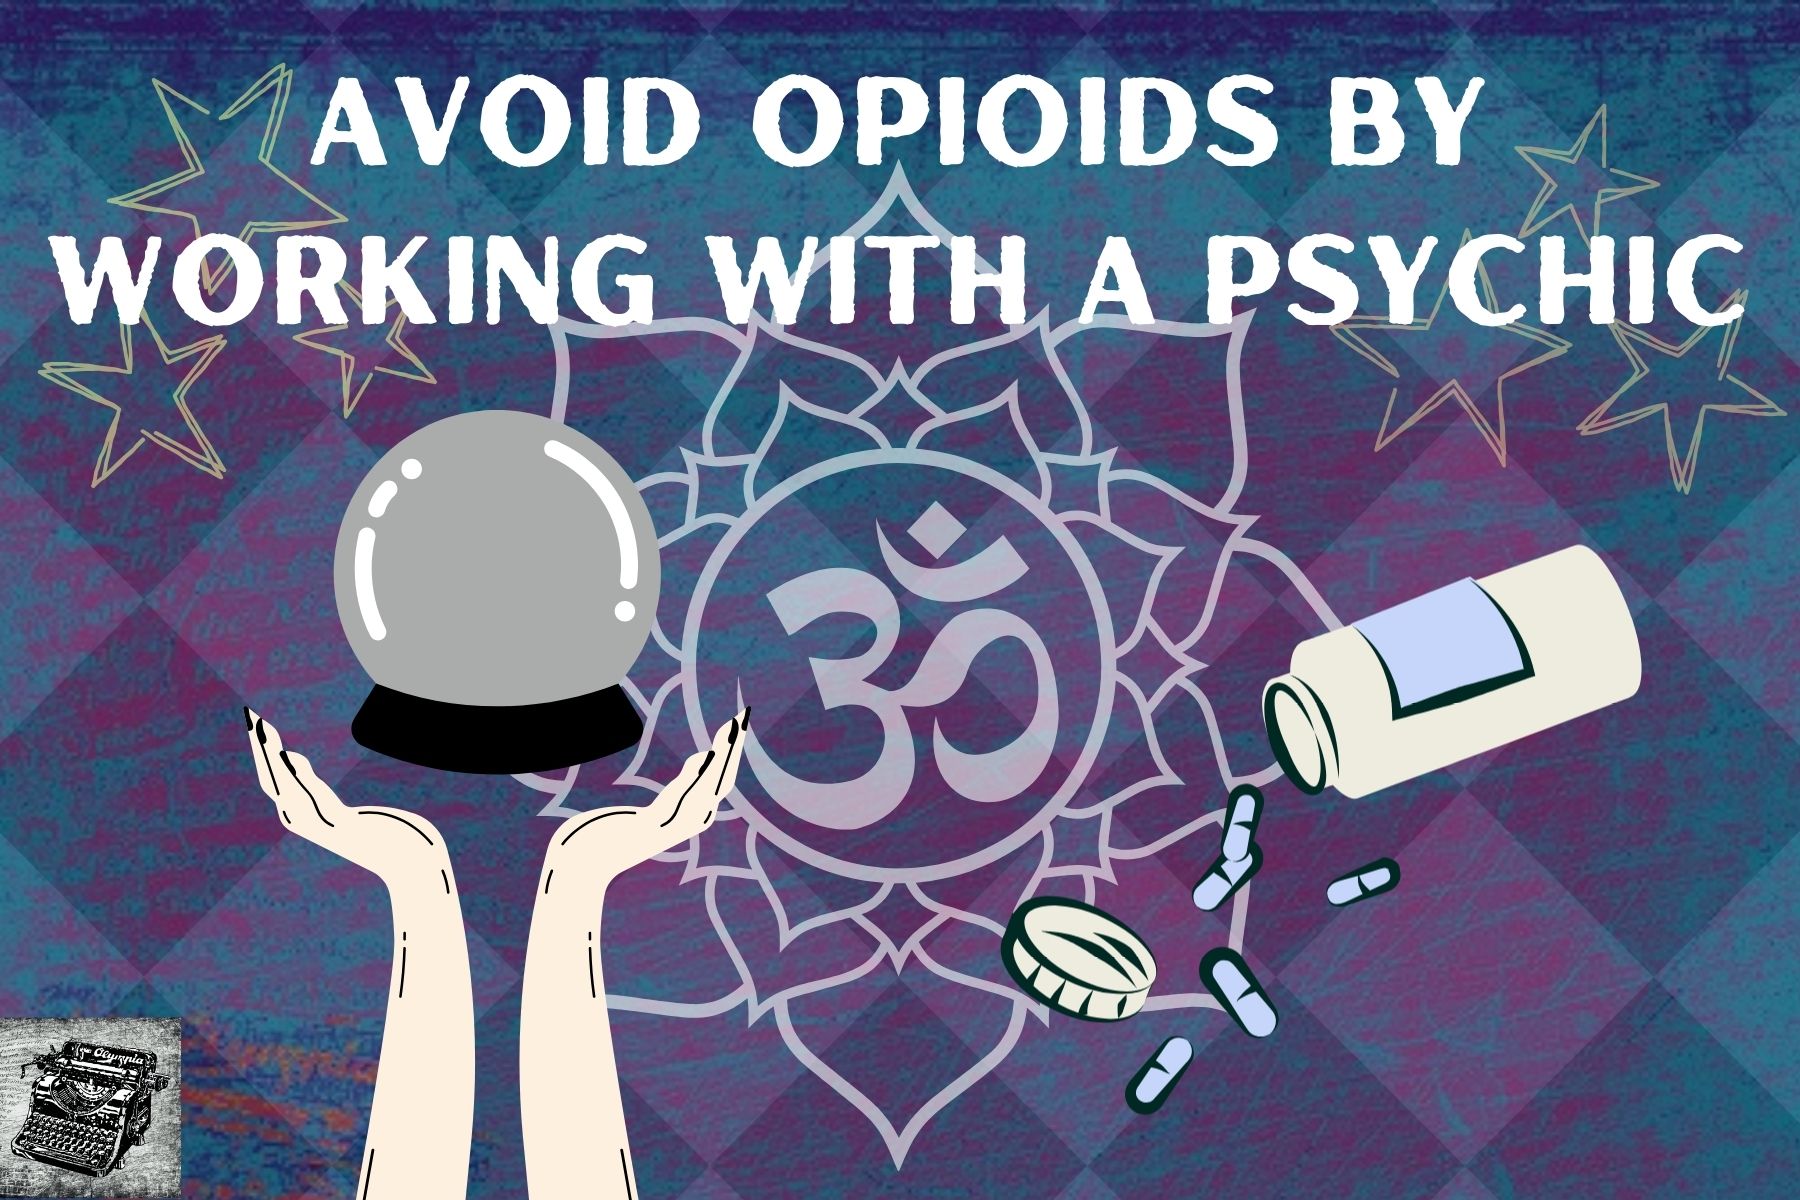 avoid opioids by working with psychics